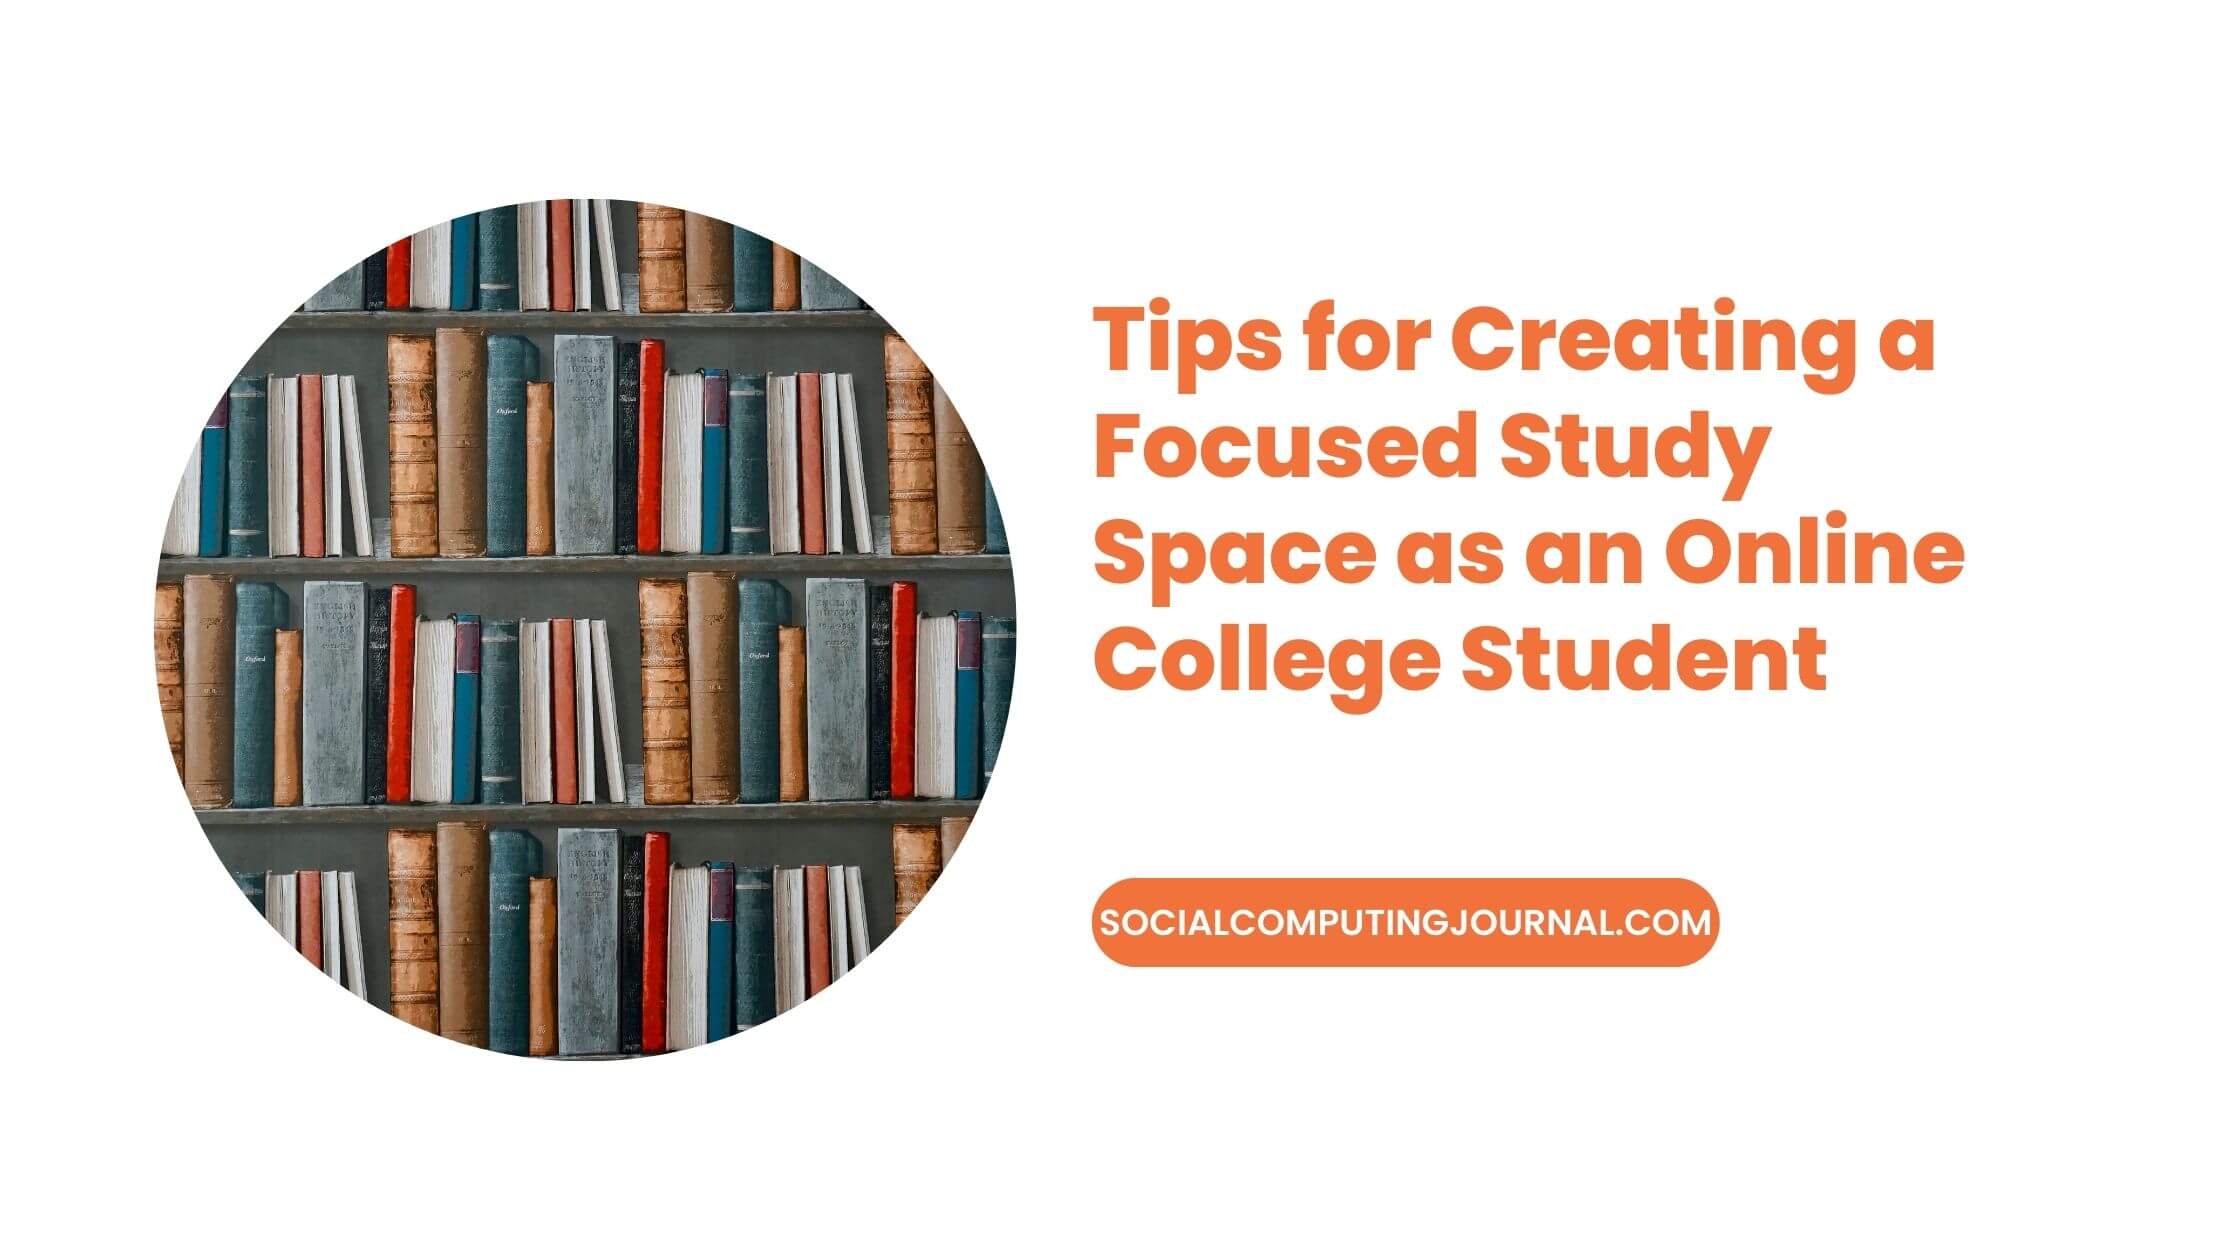 Tips for Creating a Focused Study Space as an Online College Student